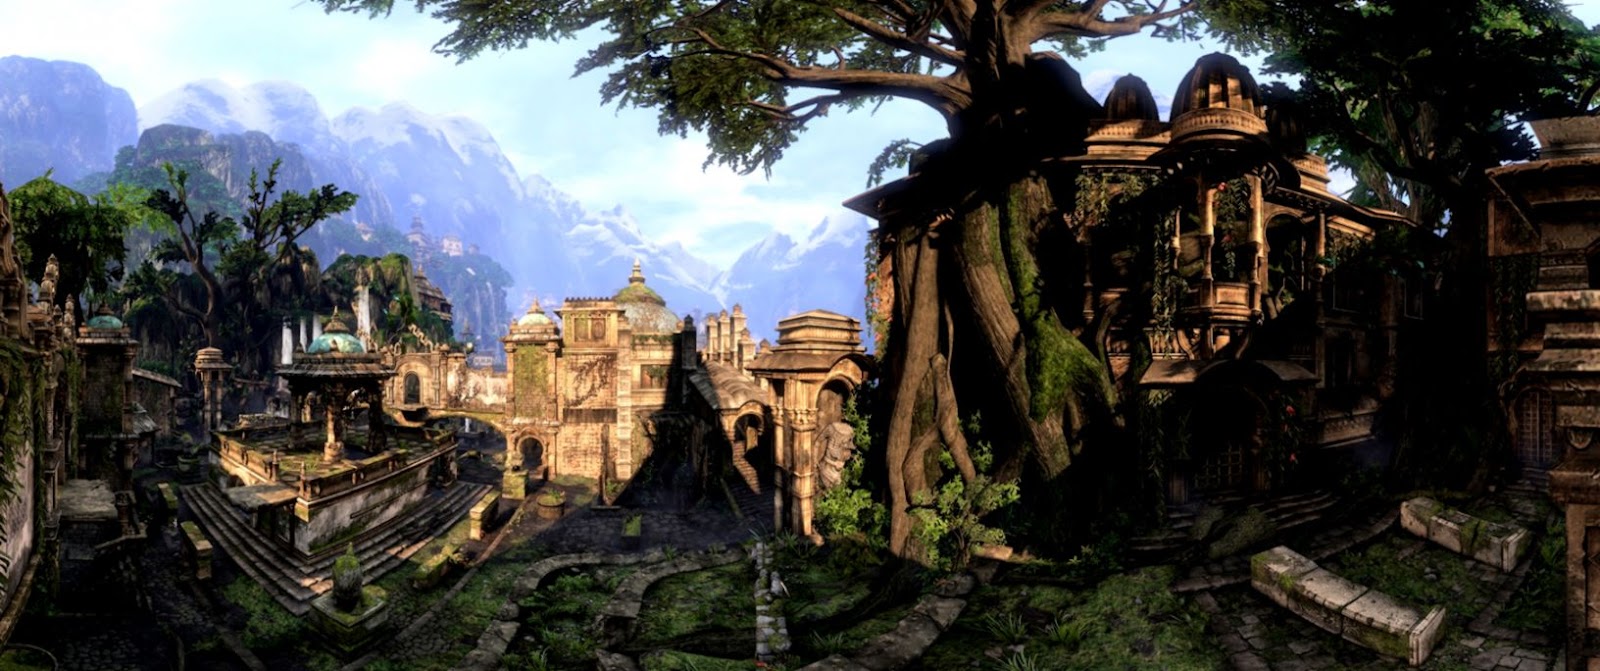 Lost City | Best Wallpapers HD Collection